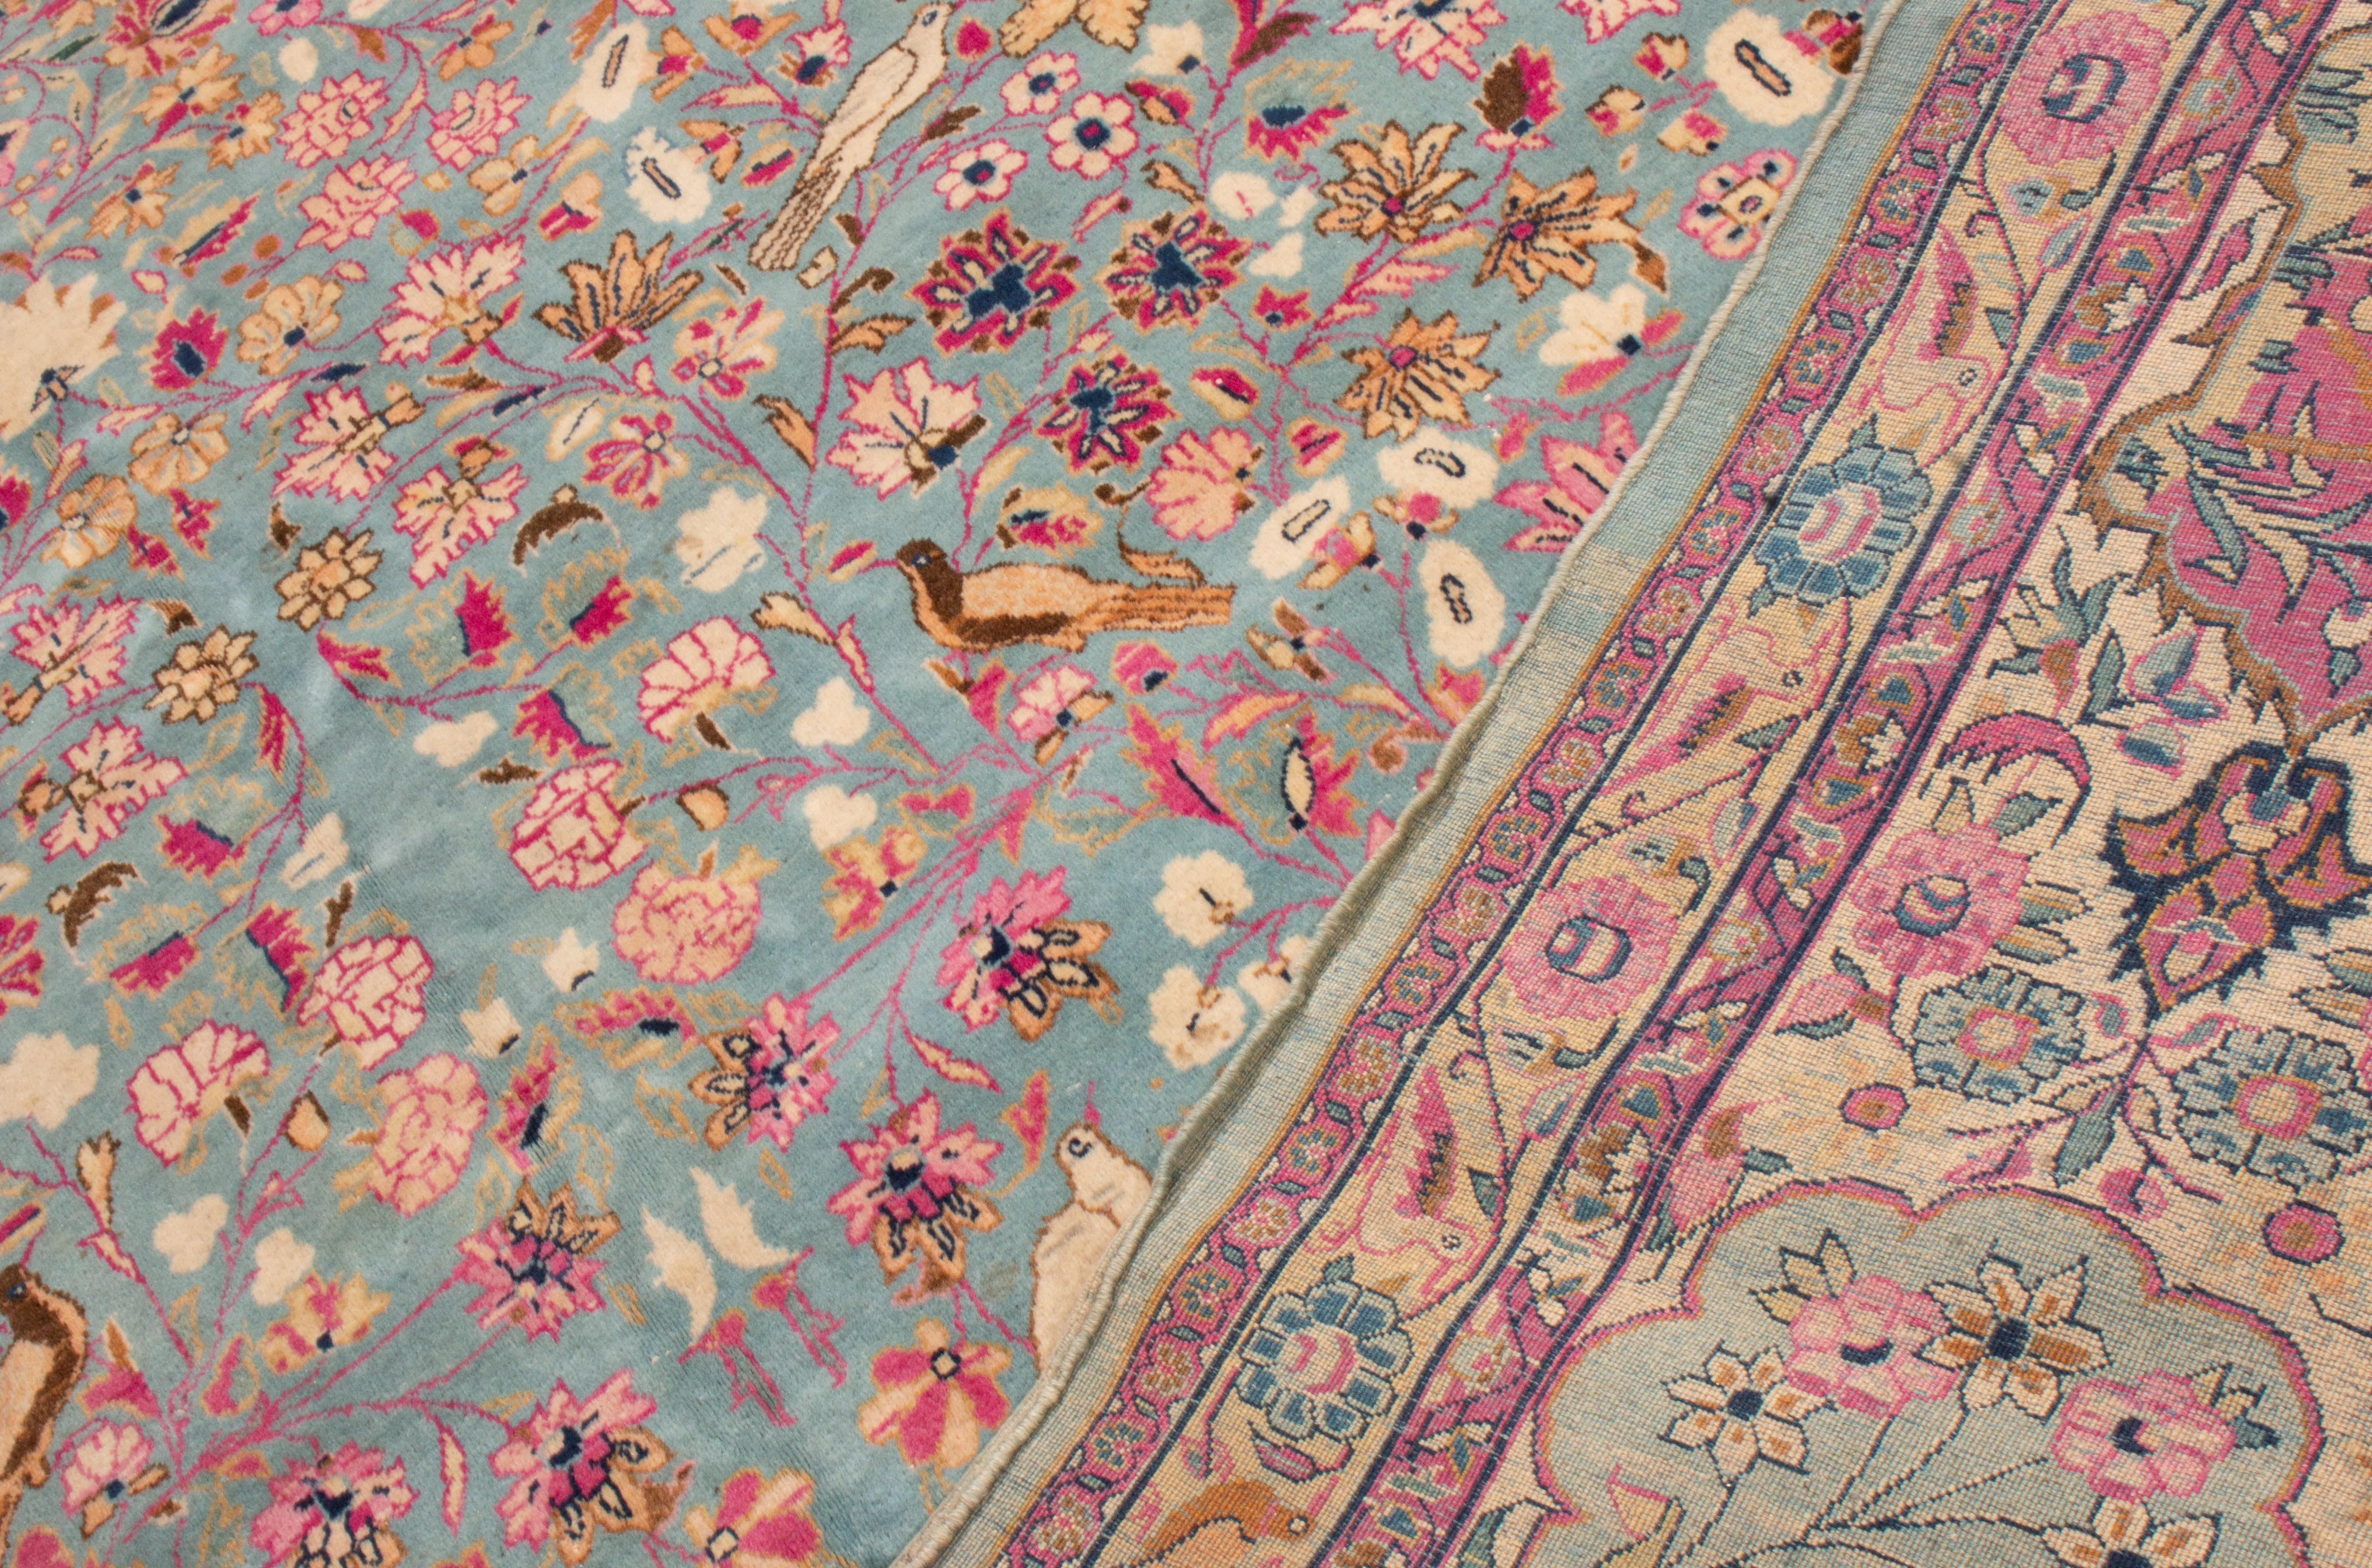 Hand-Knotted Antique Signature Kashan Pink and Blue Wool Rug with All-Over Floral Patterns